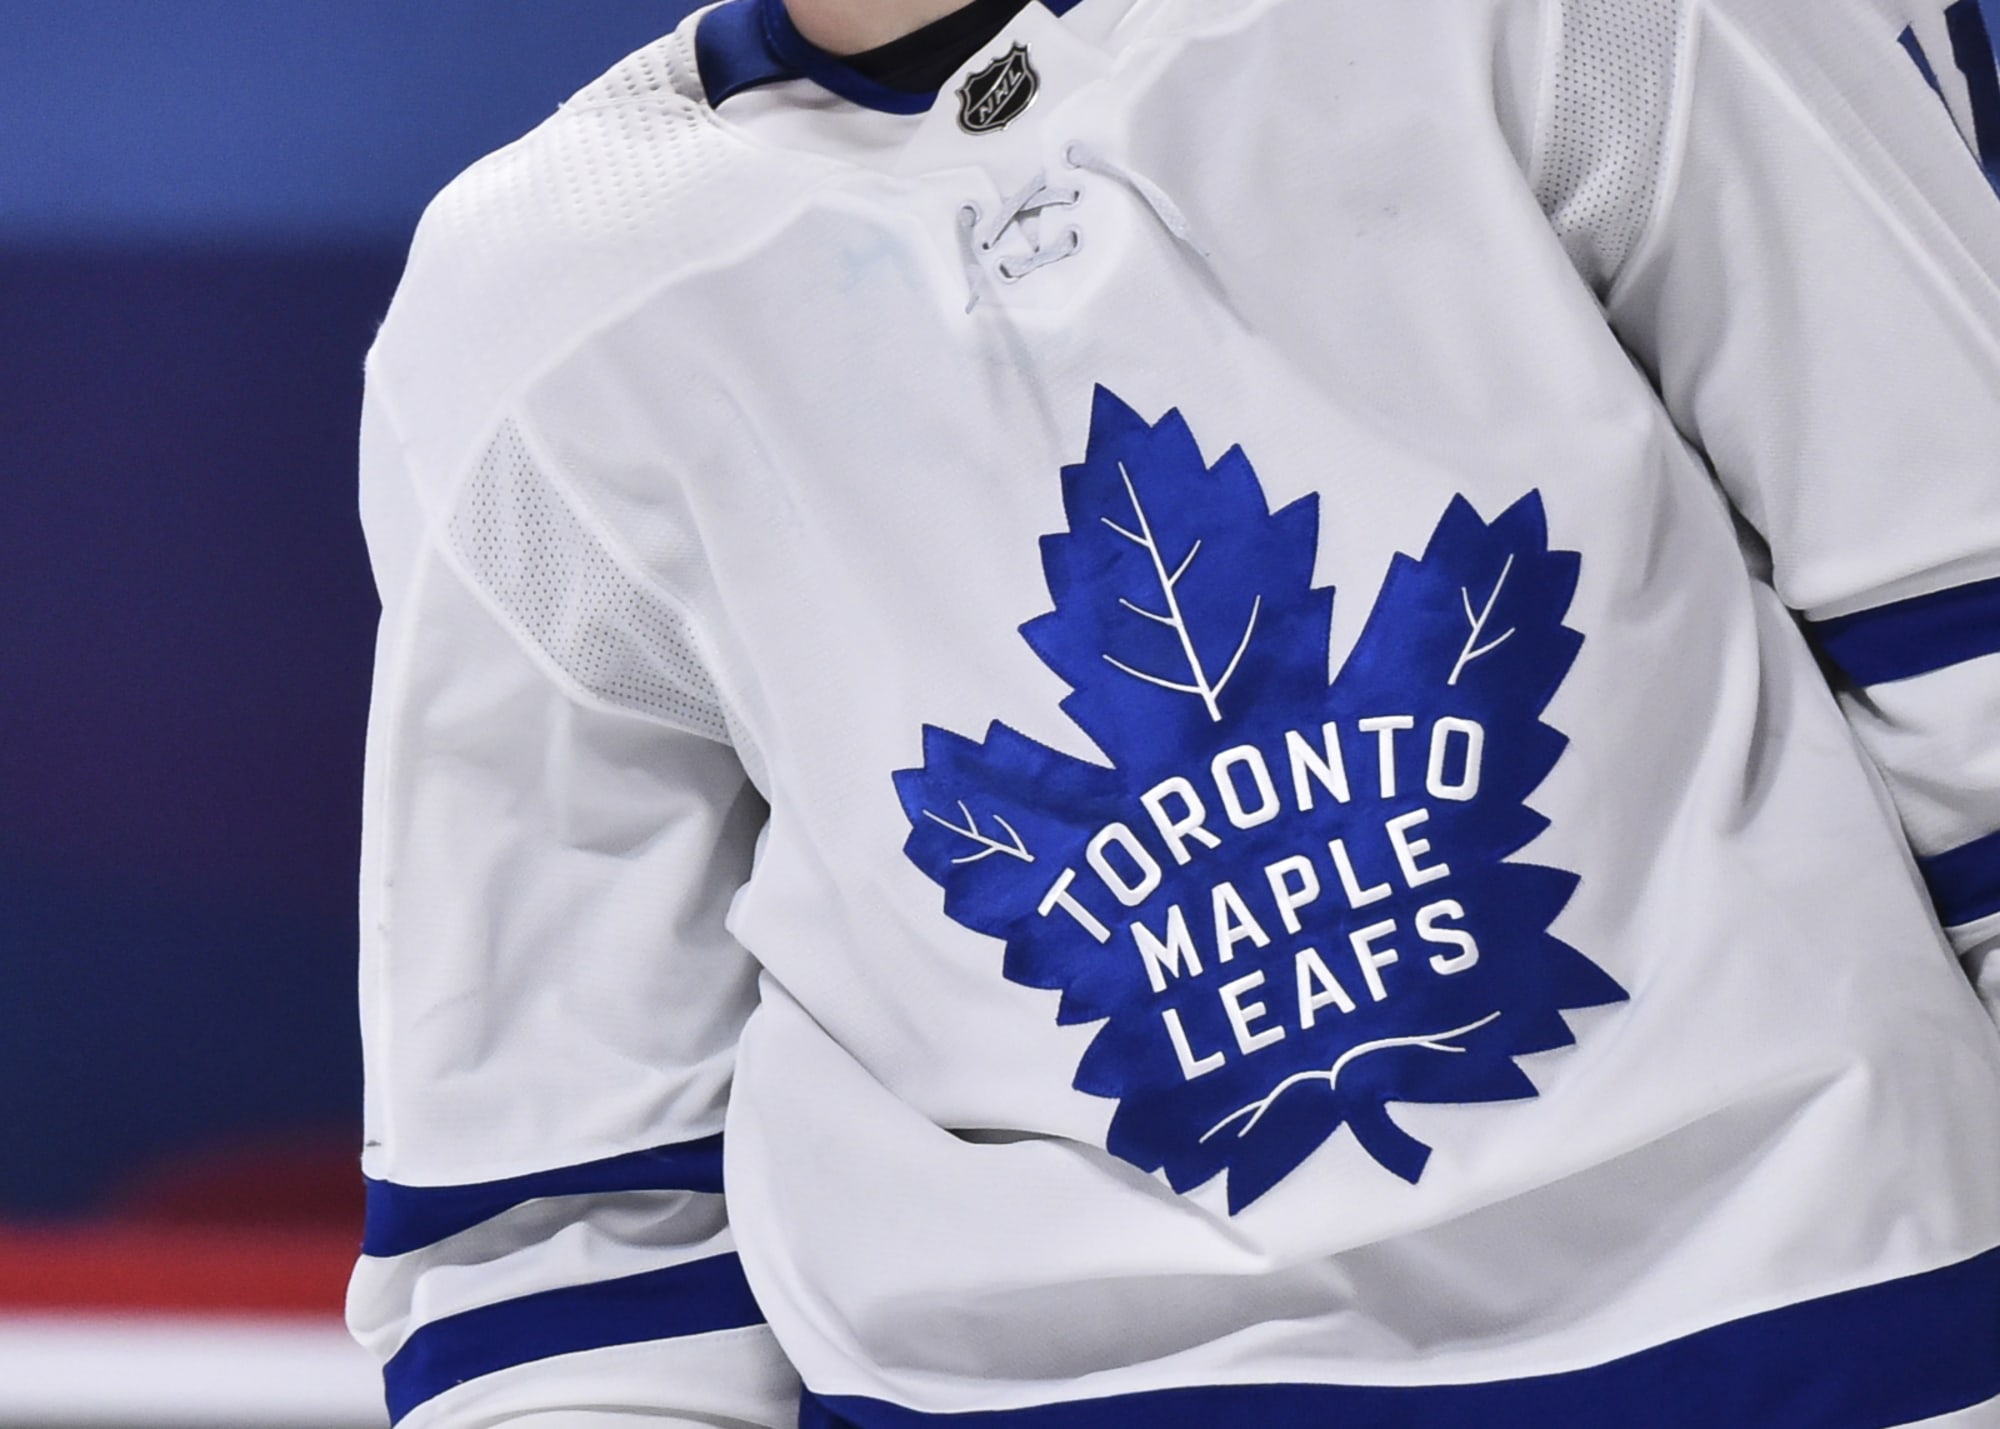 Toronto Maple Leafs - Franchise, Team, Arena and Uniform History, Heritage  Uniforms and Jerseys